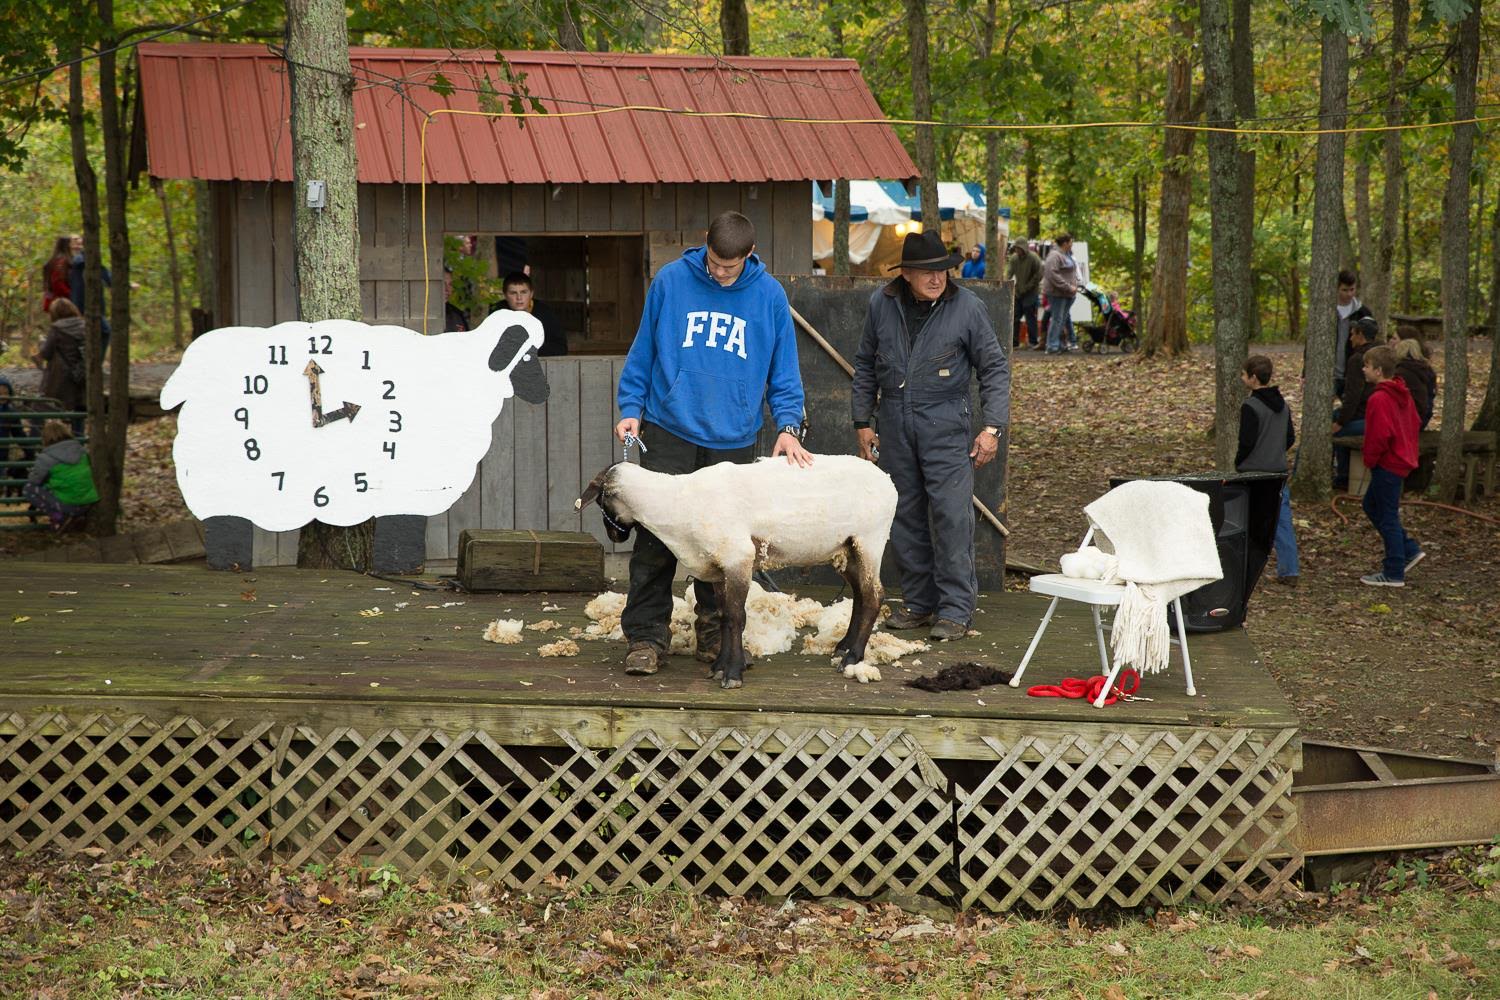 Pendleton County has a long tradition of wool and sheep shearing.